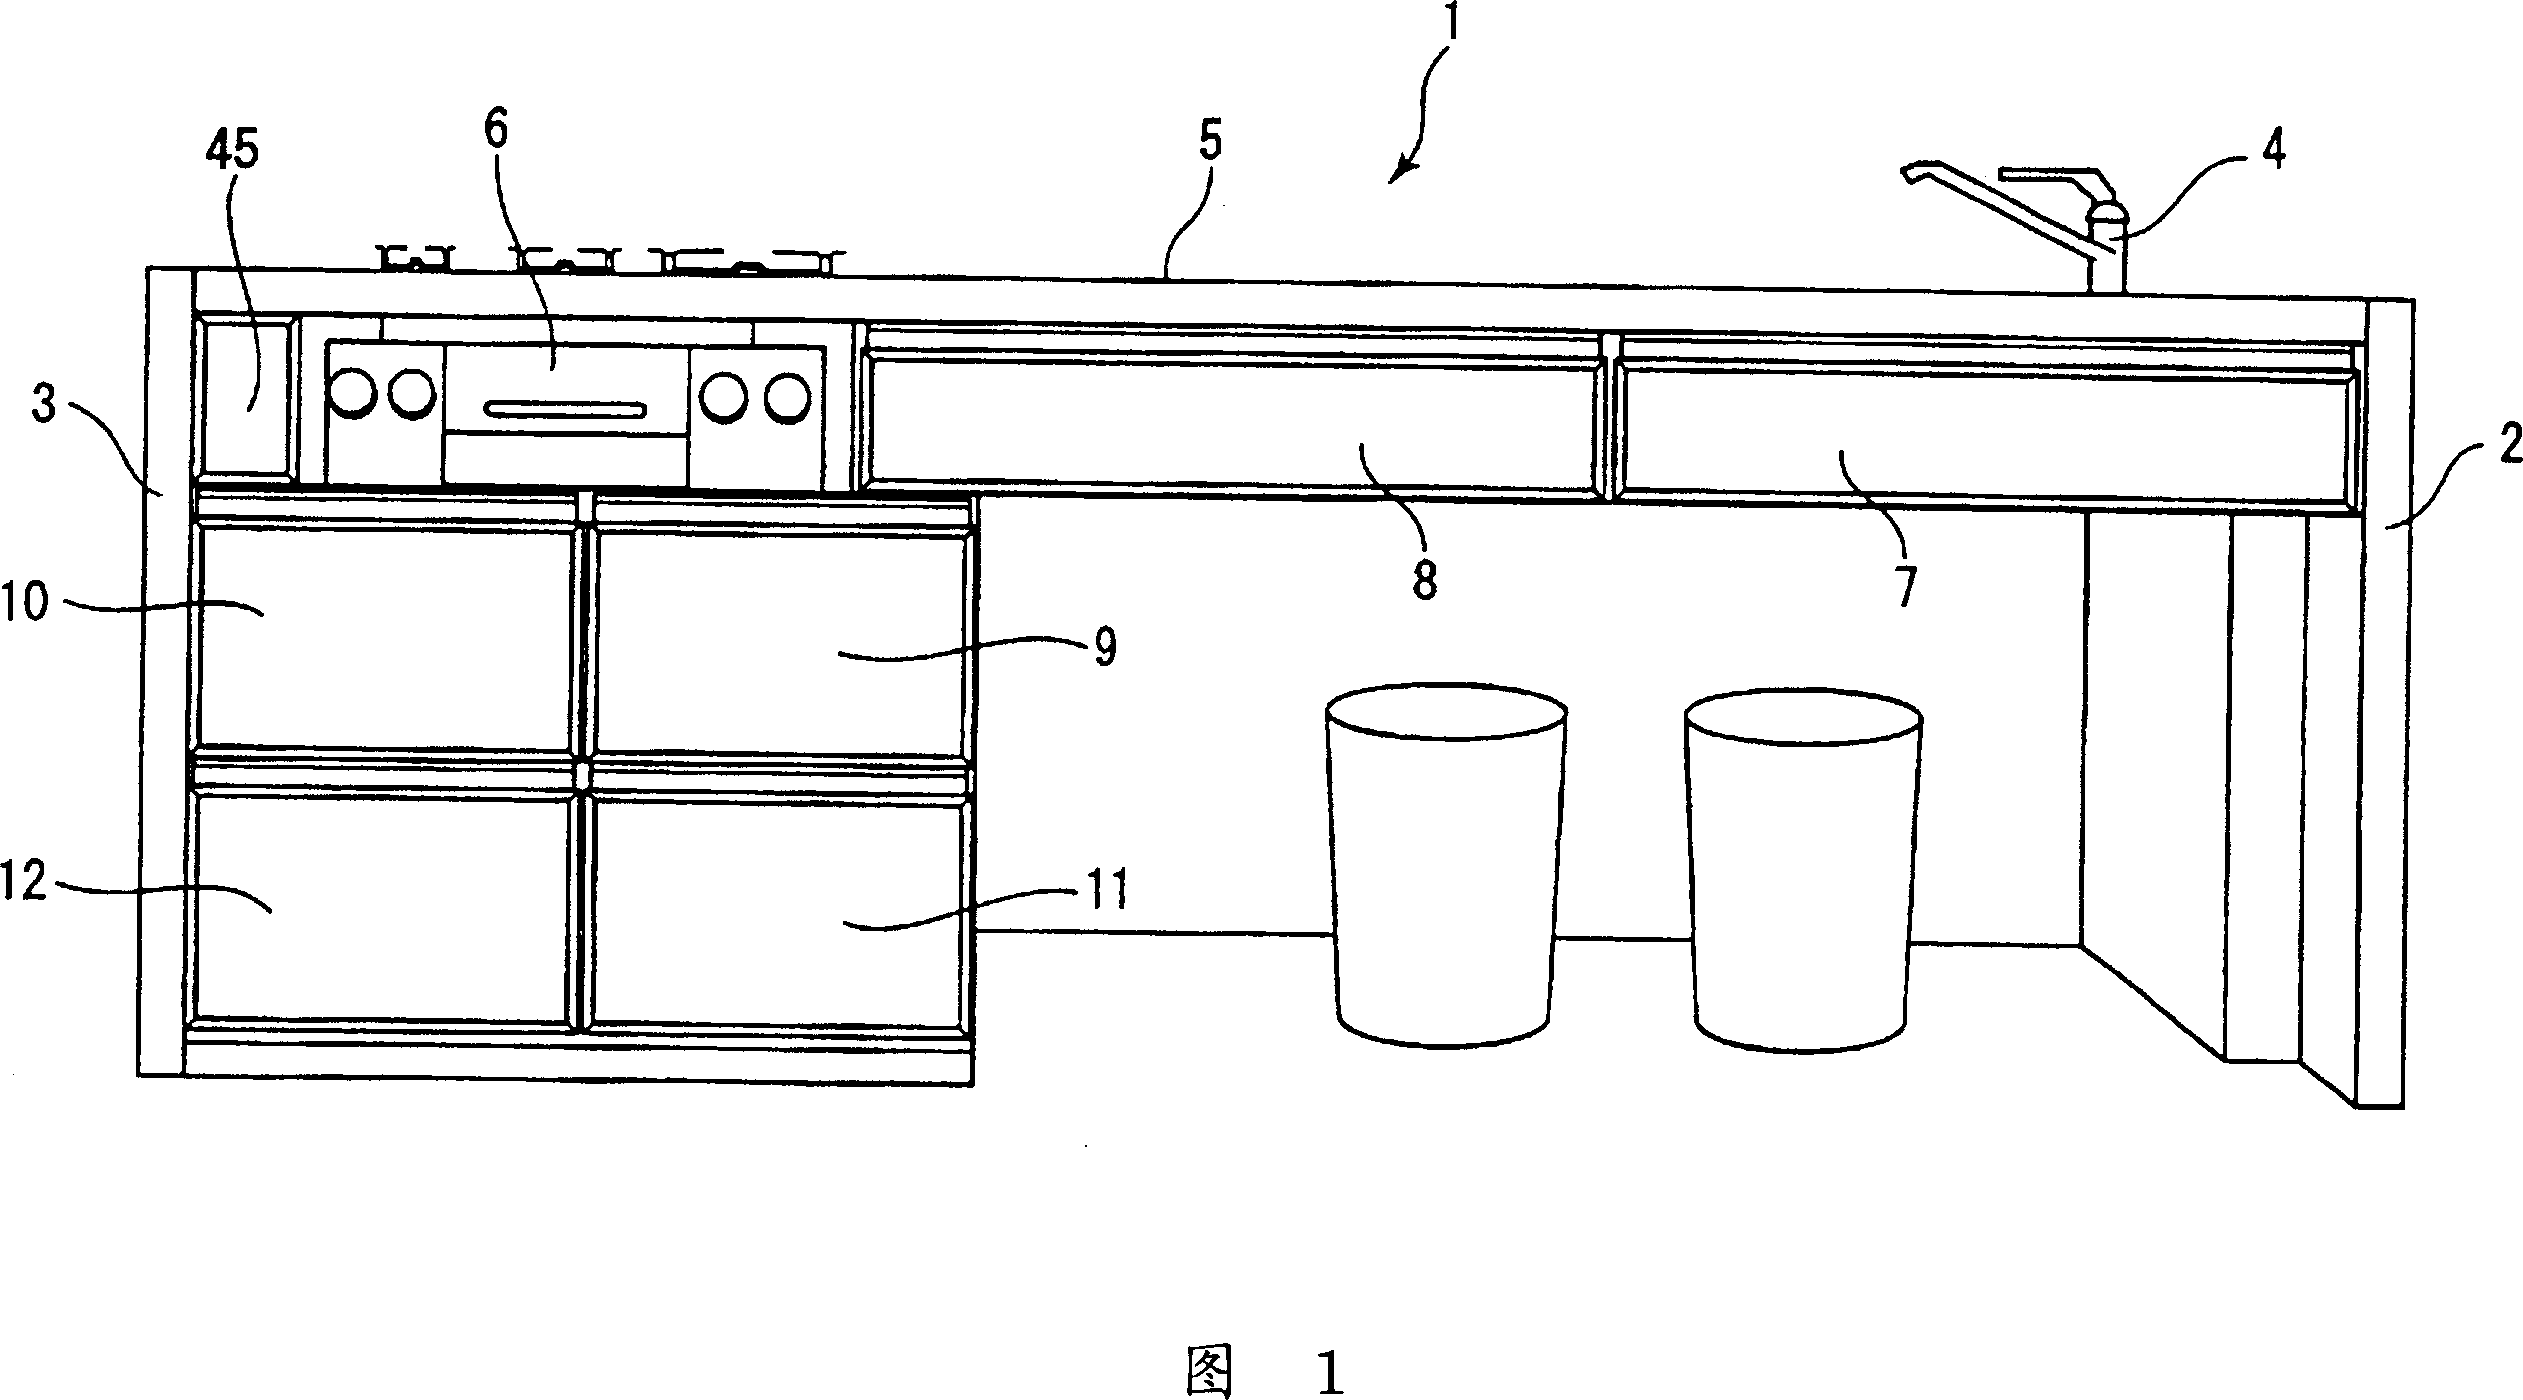 Panel structure and kitchen base with the same